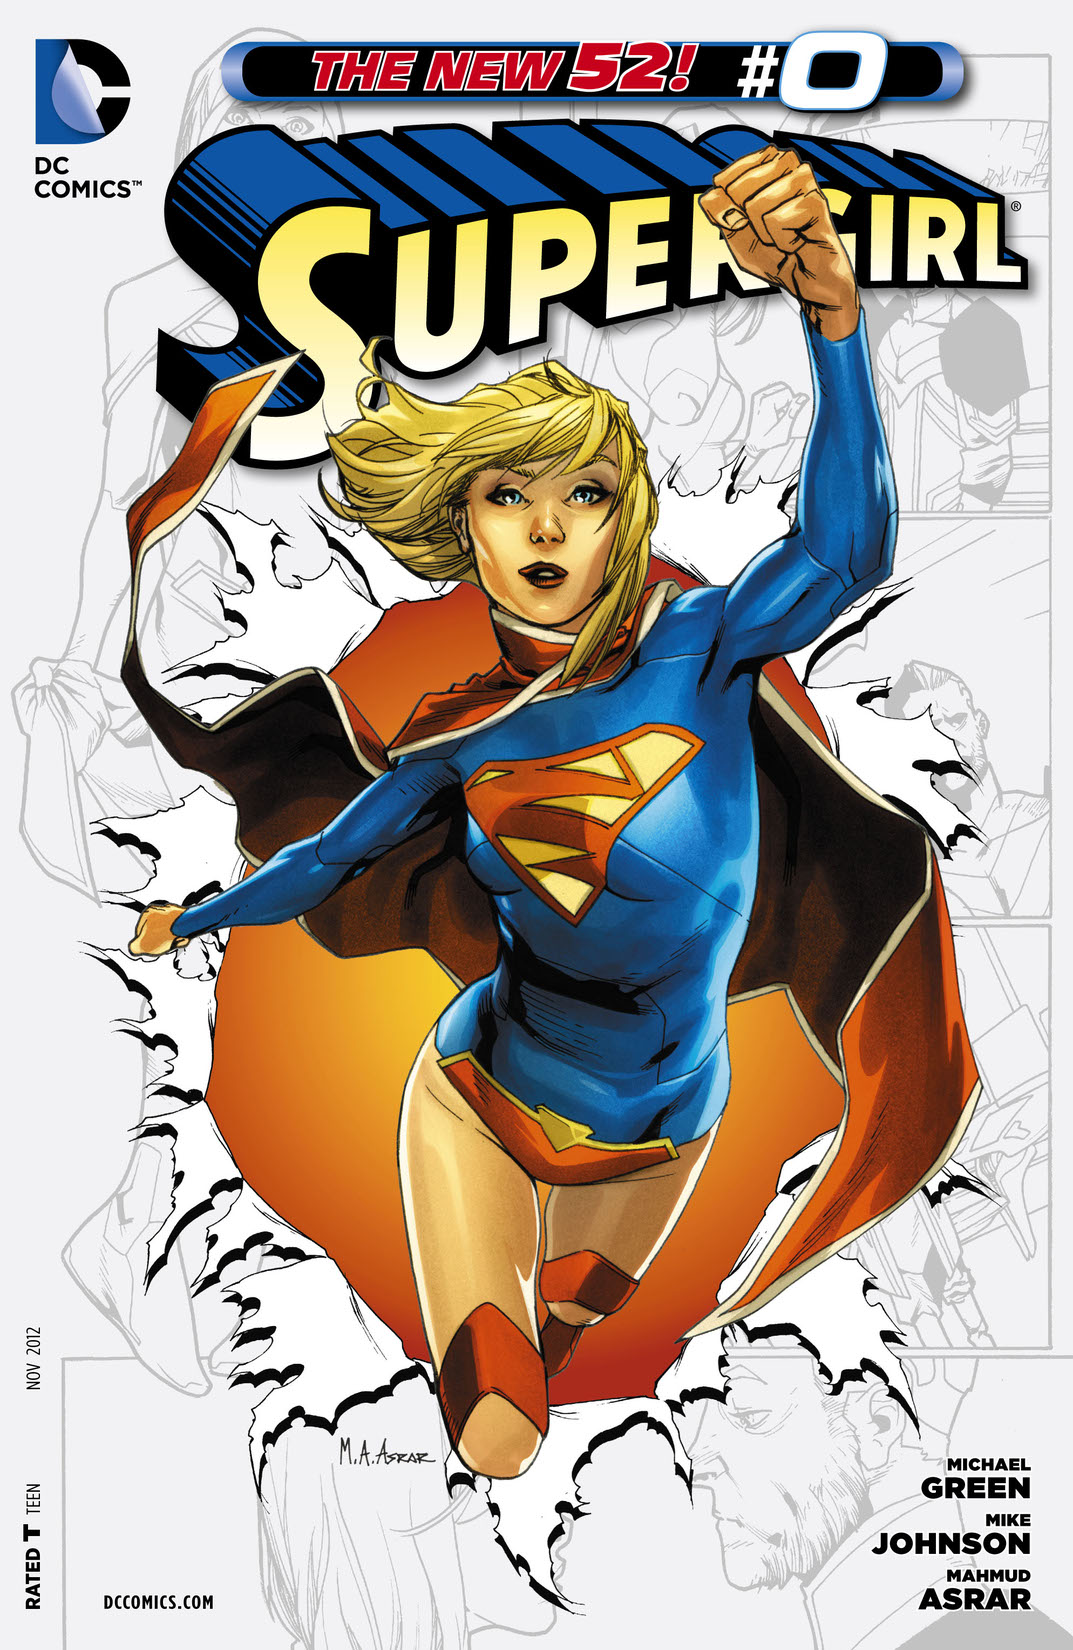 Supergirl (2011-) #0 preview images